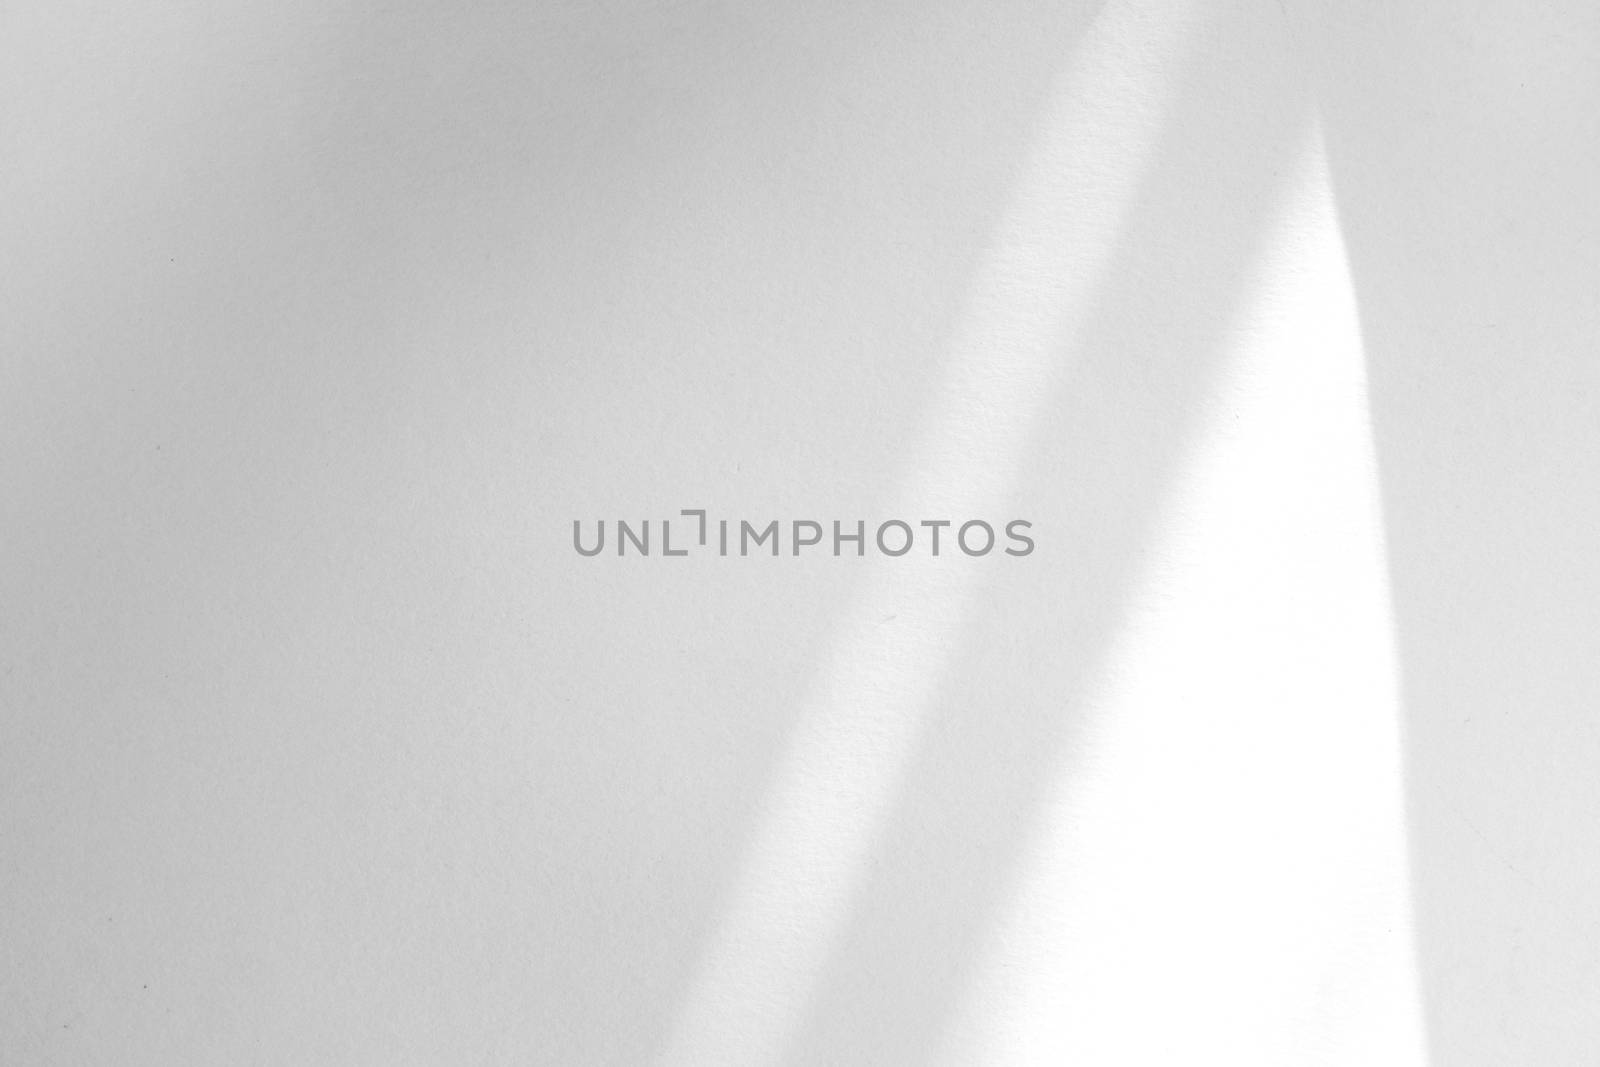 Window natural shadow overlay effect on white texture background by nuchylee